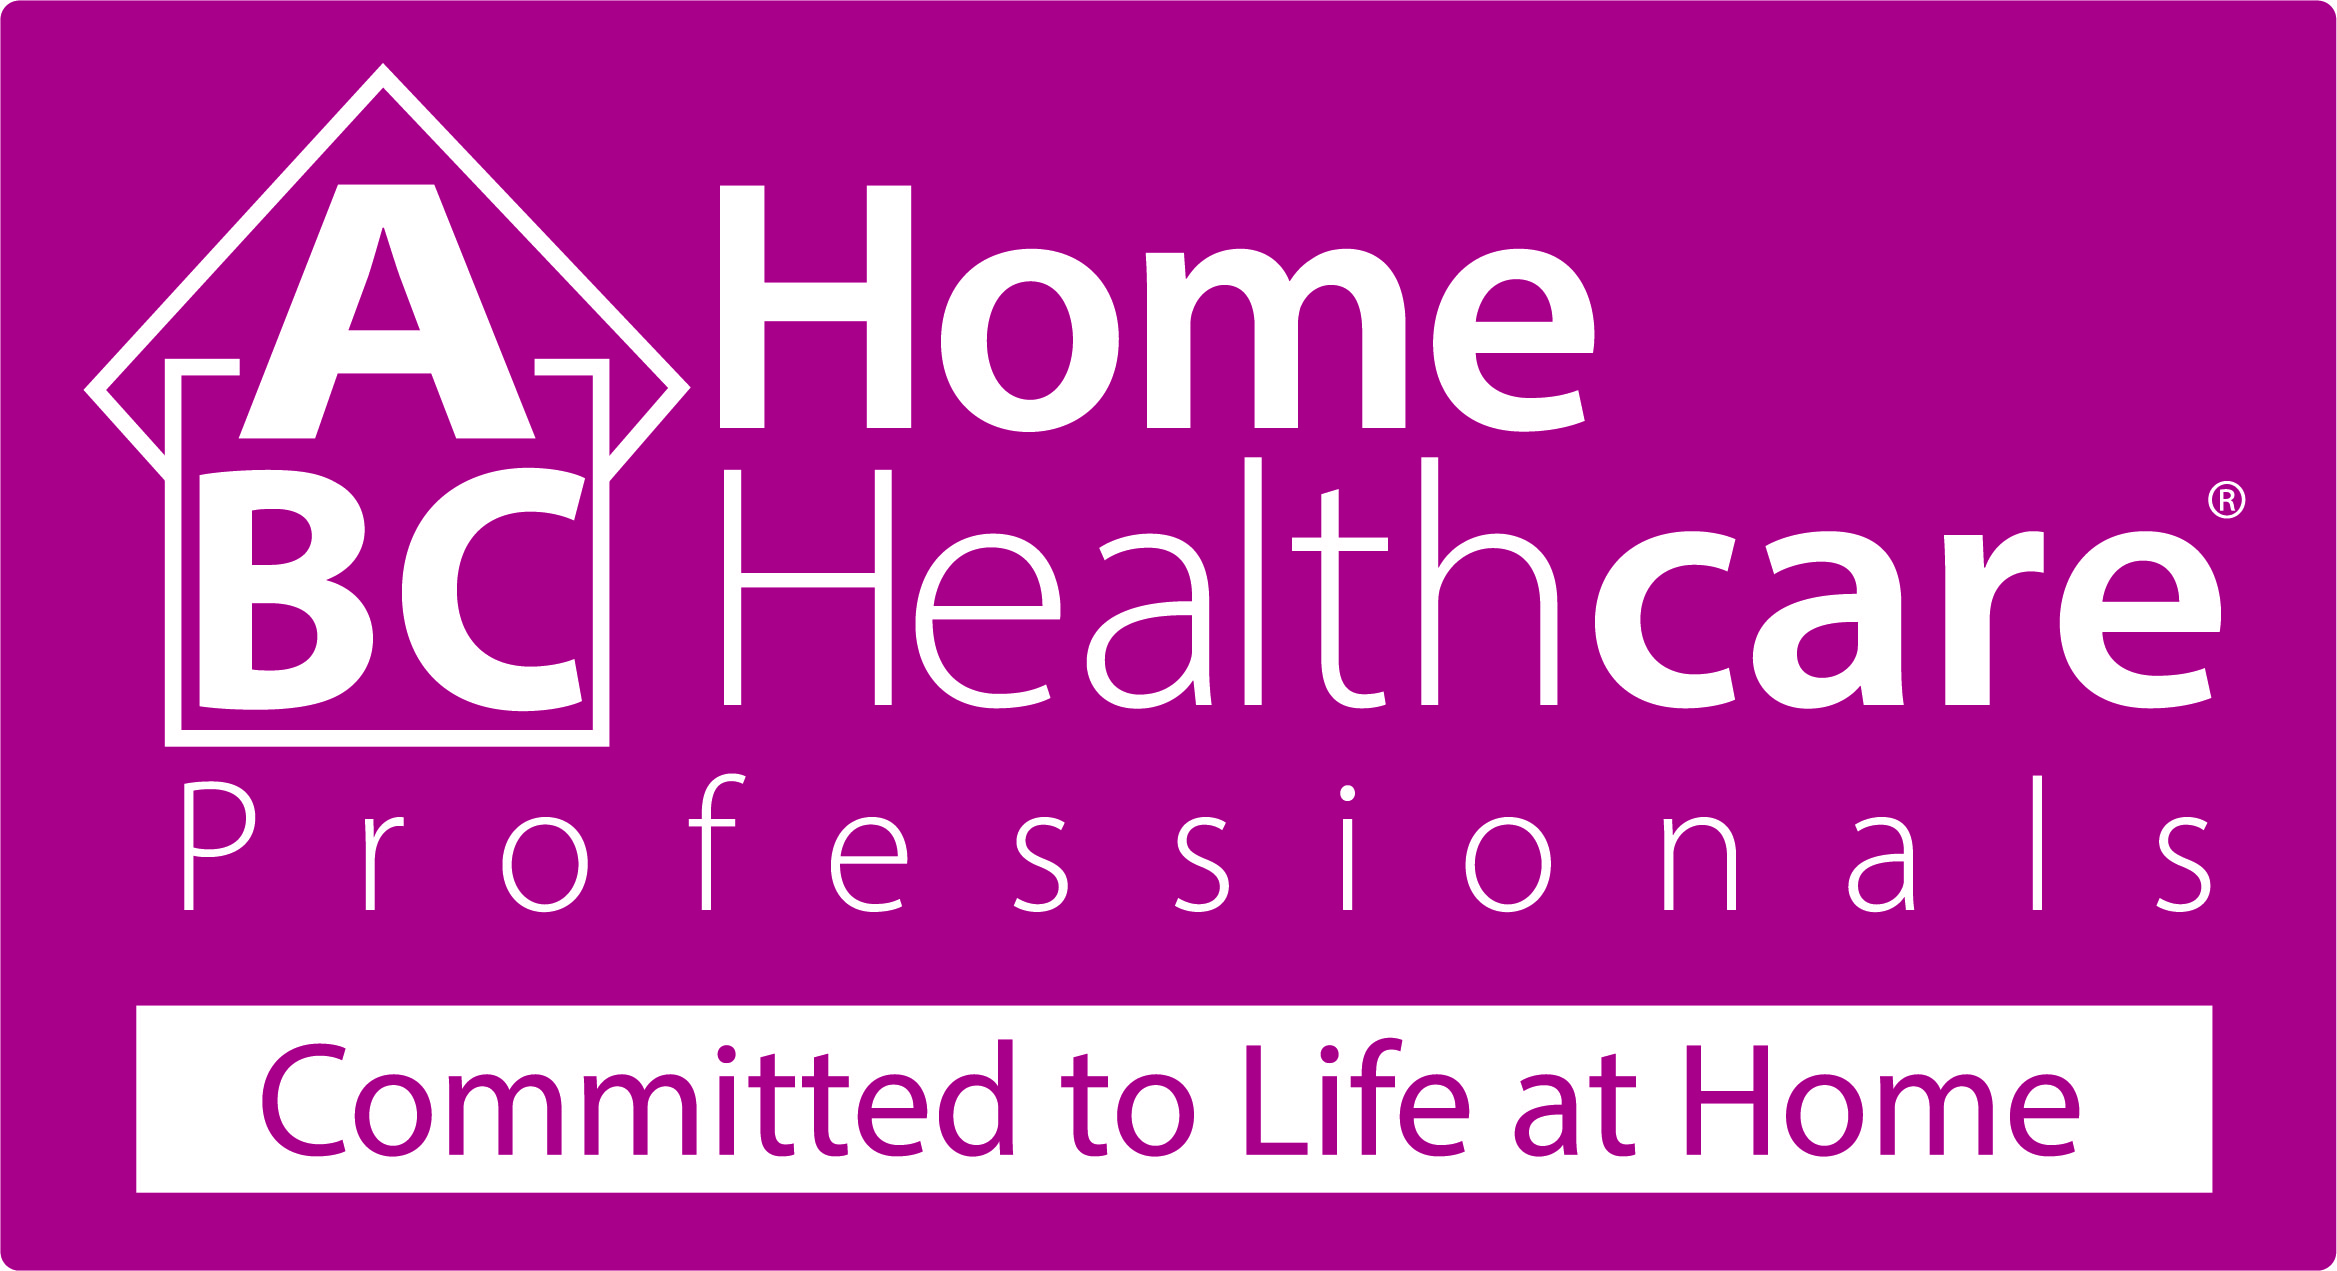 About Us | What makes ABC Home Healthcare different